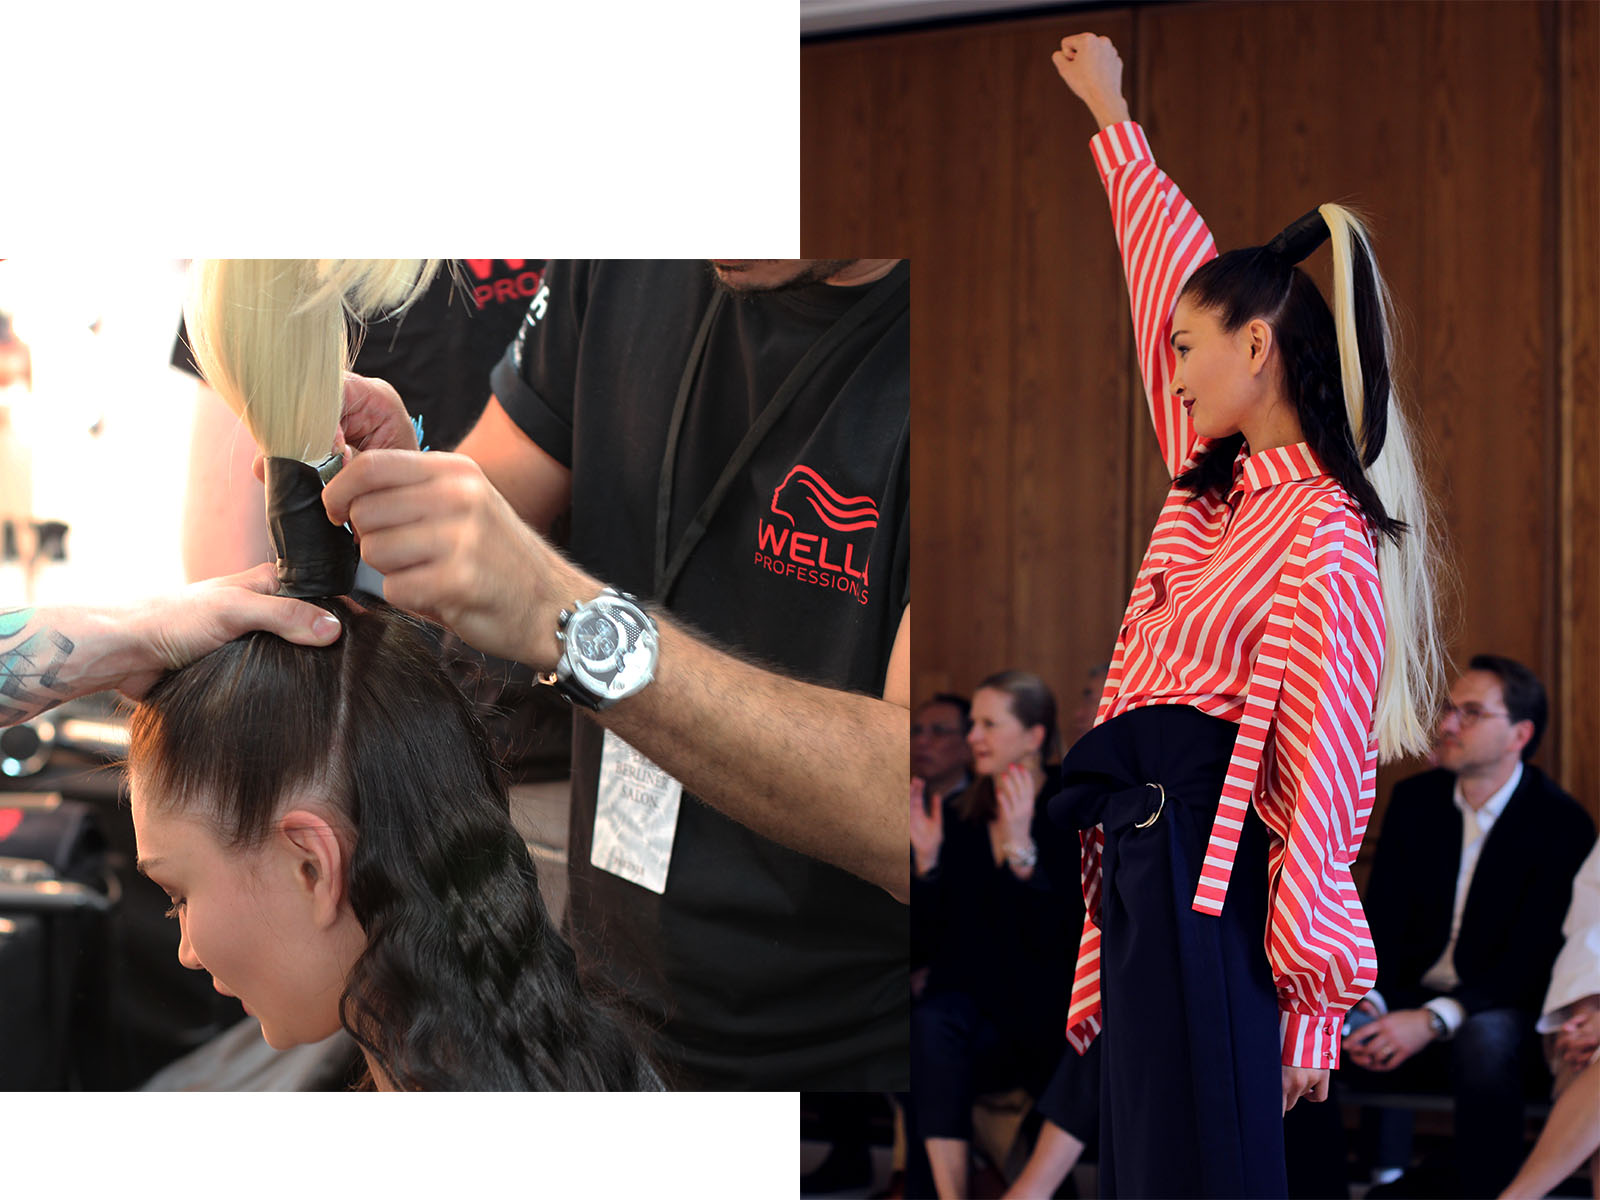 Backstage with Wella Professionals at Berlin Fashion Week